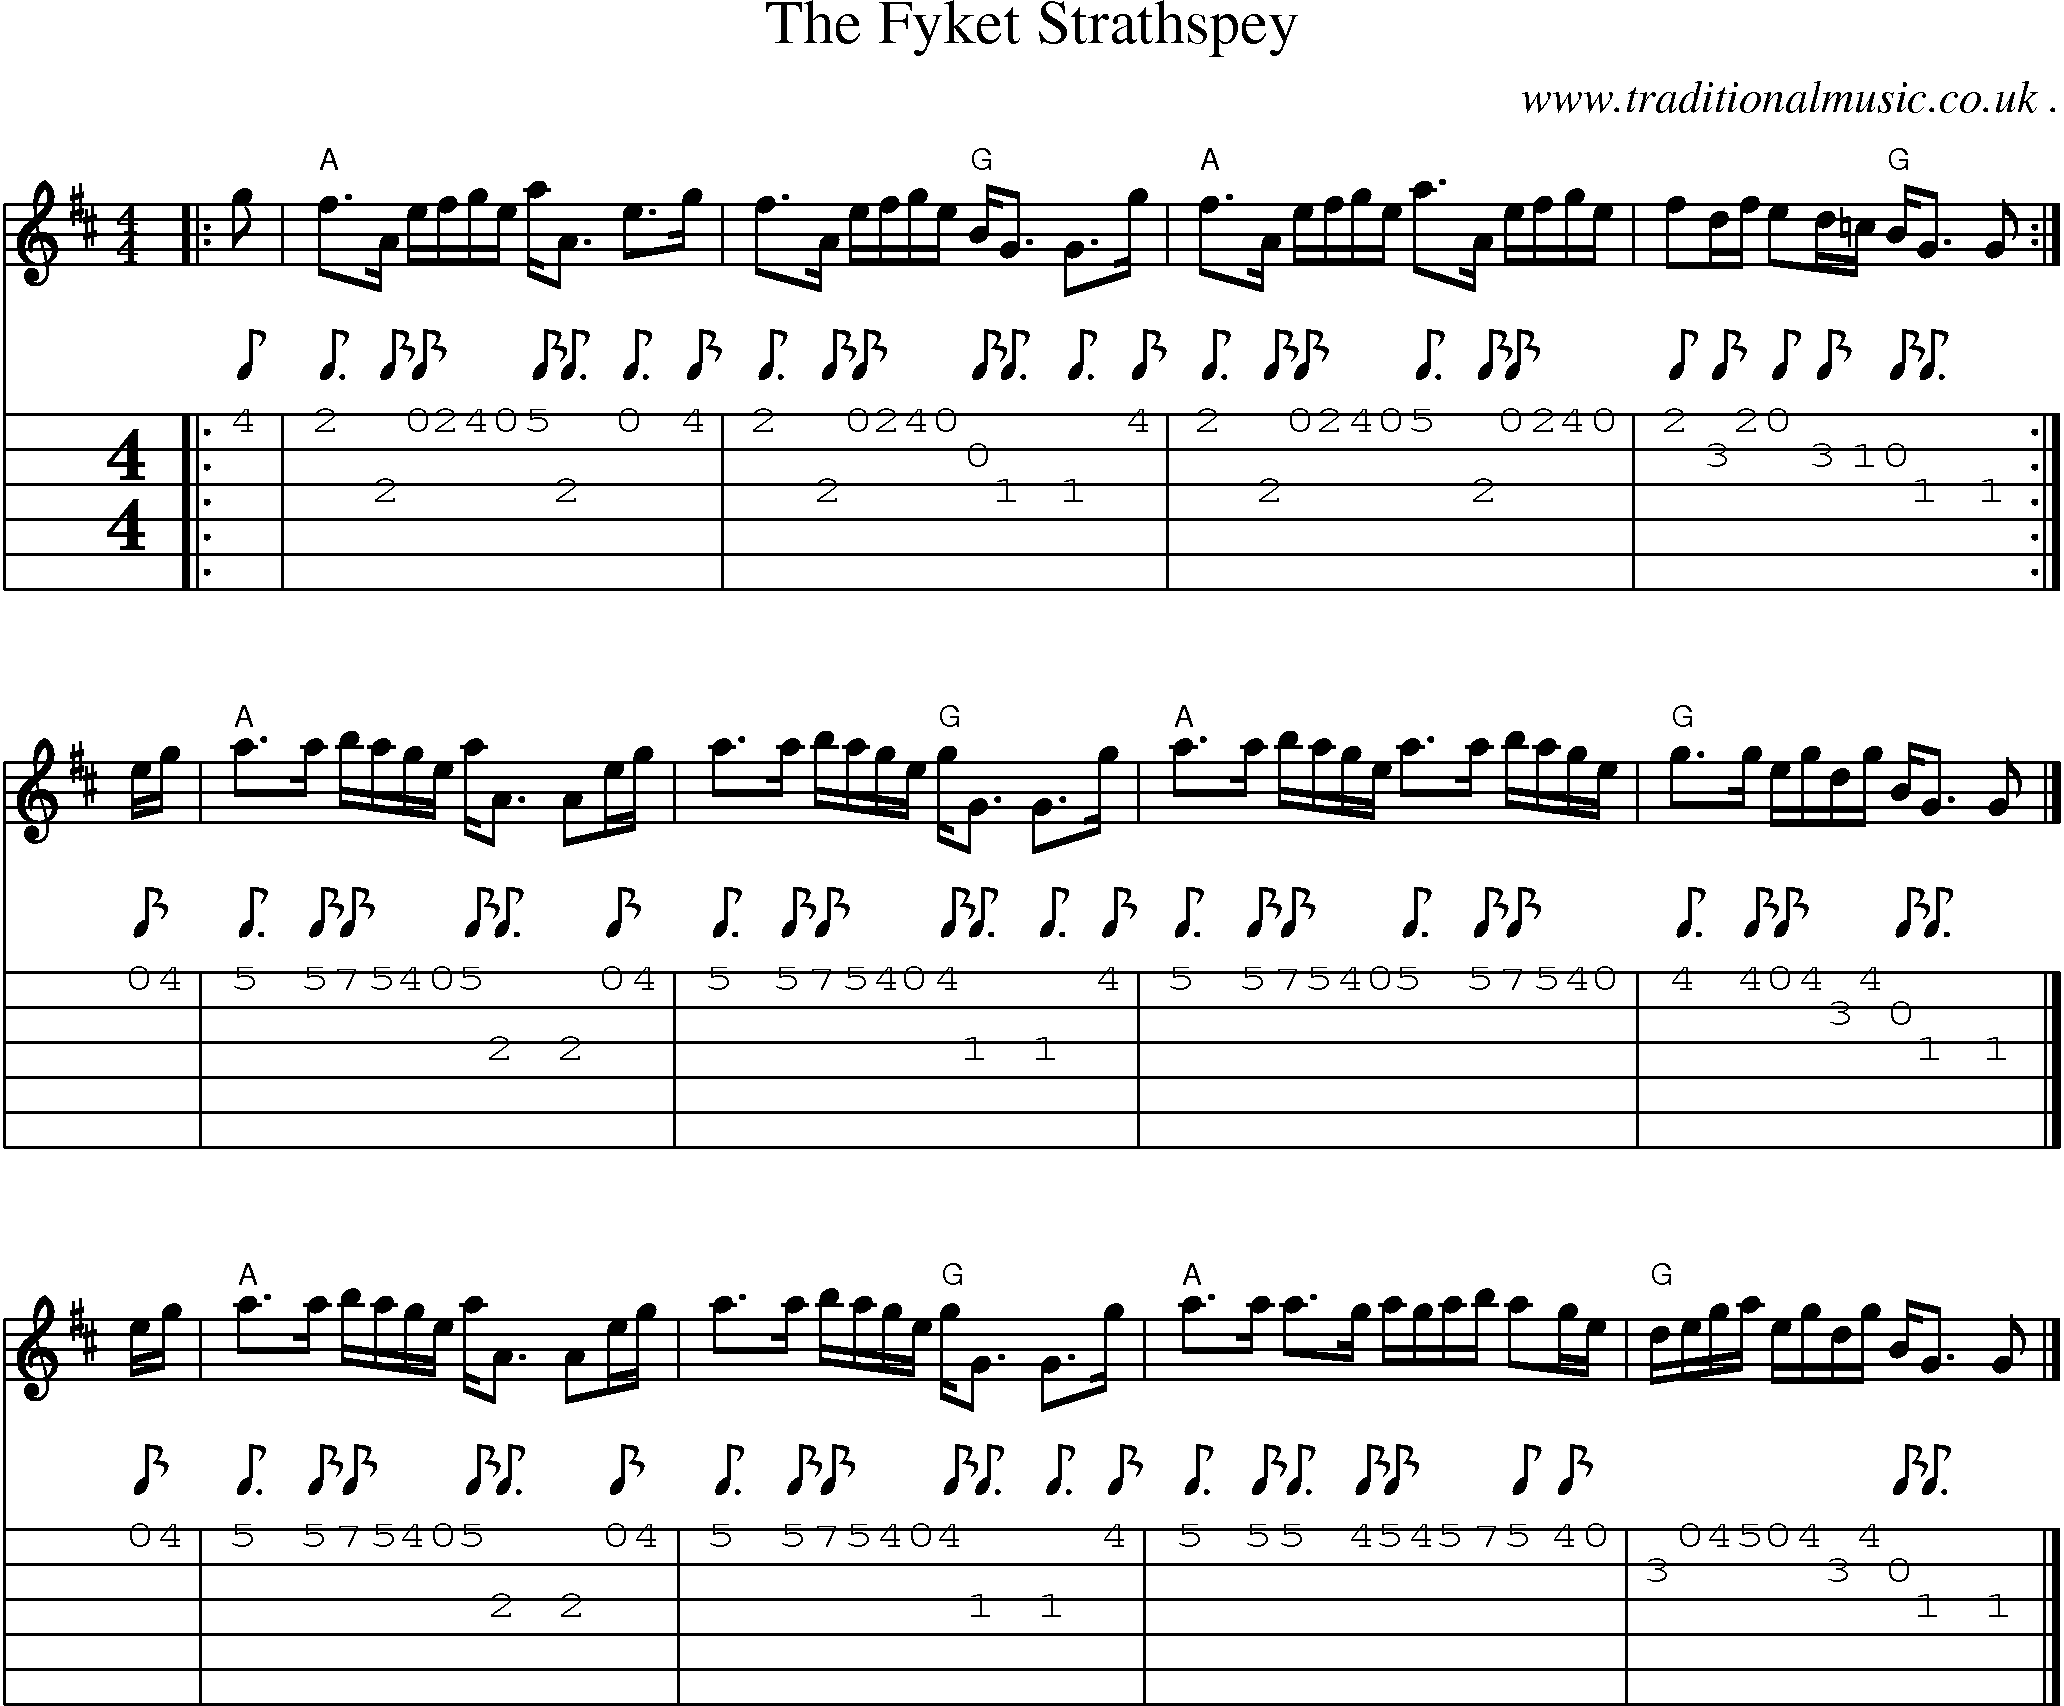 Sheet-music  score, Chords and Guitar Tabs for The Fyket Strathspey